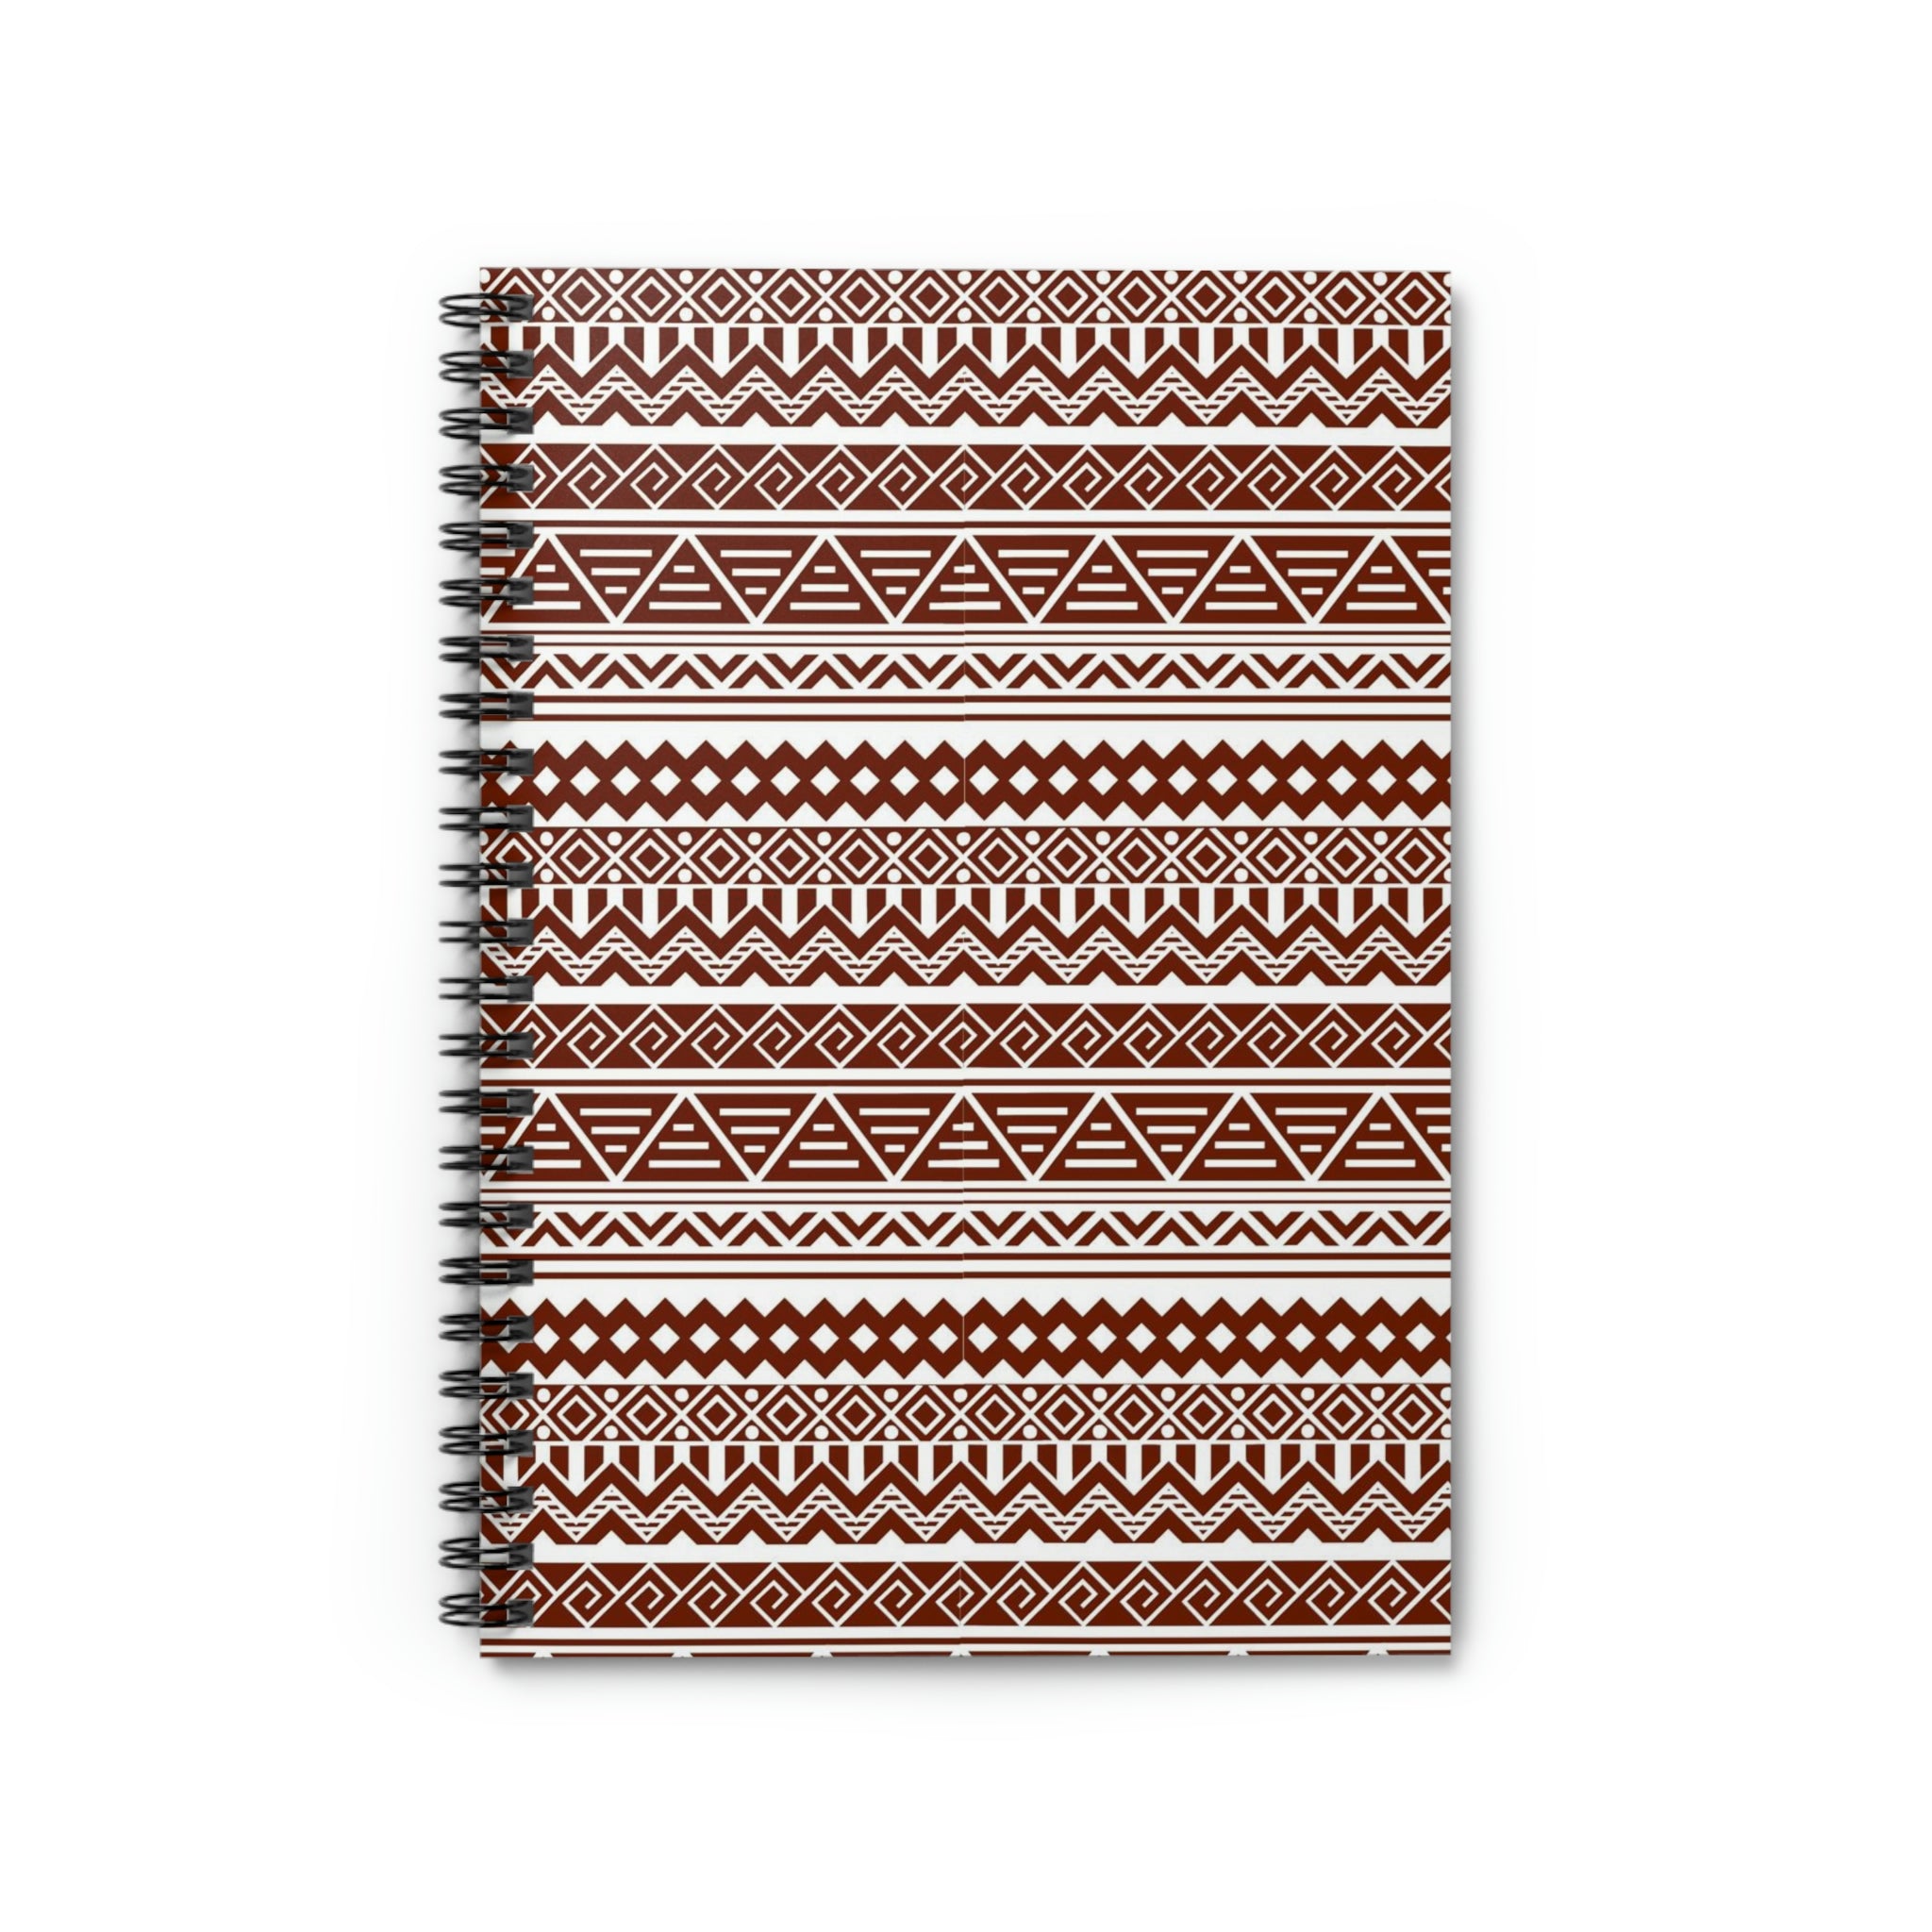 Maroon Aztec Spiral Notebook - Ruled Line